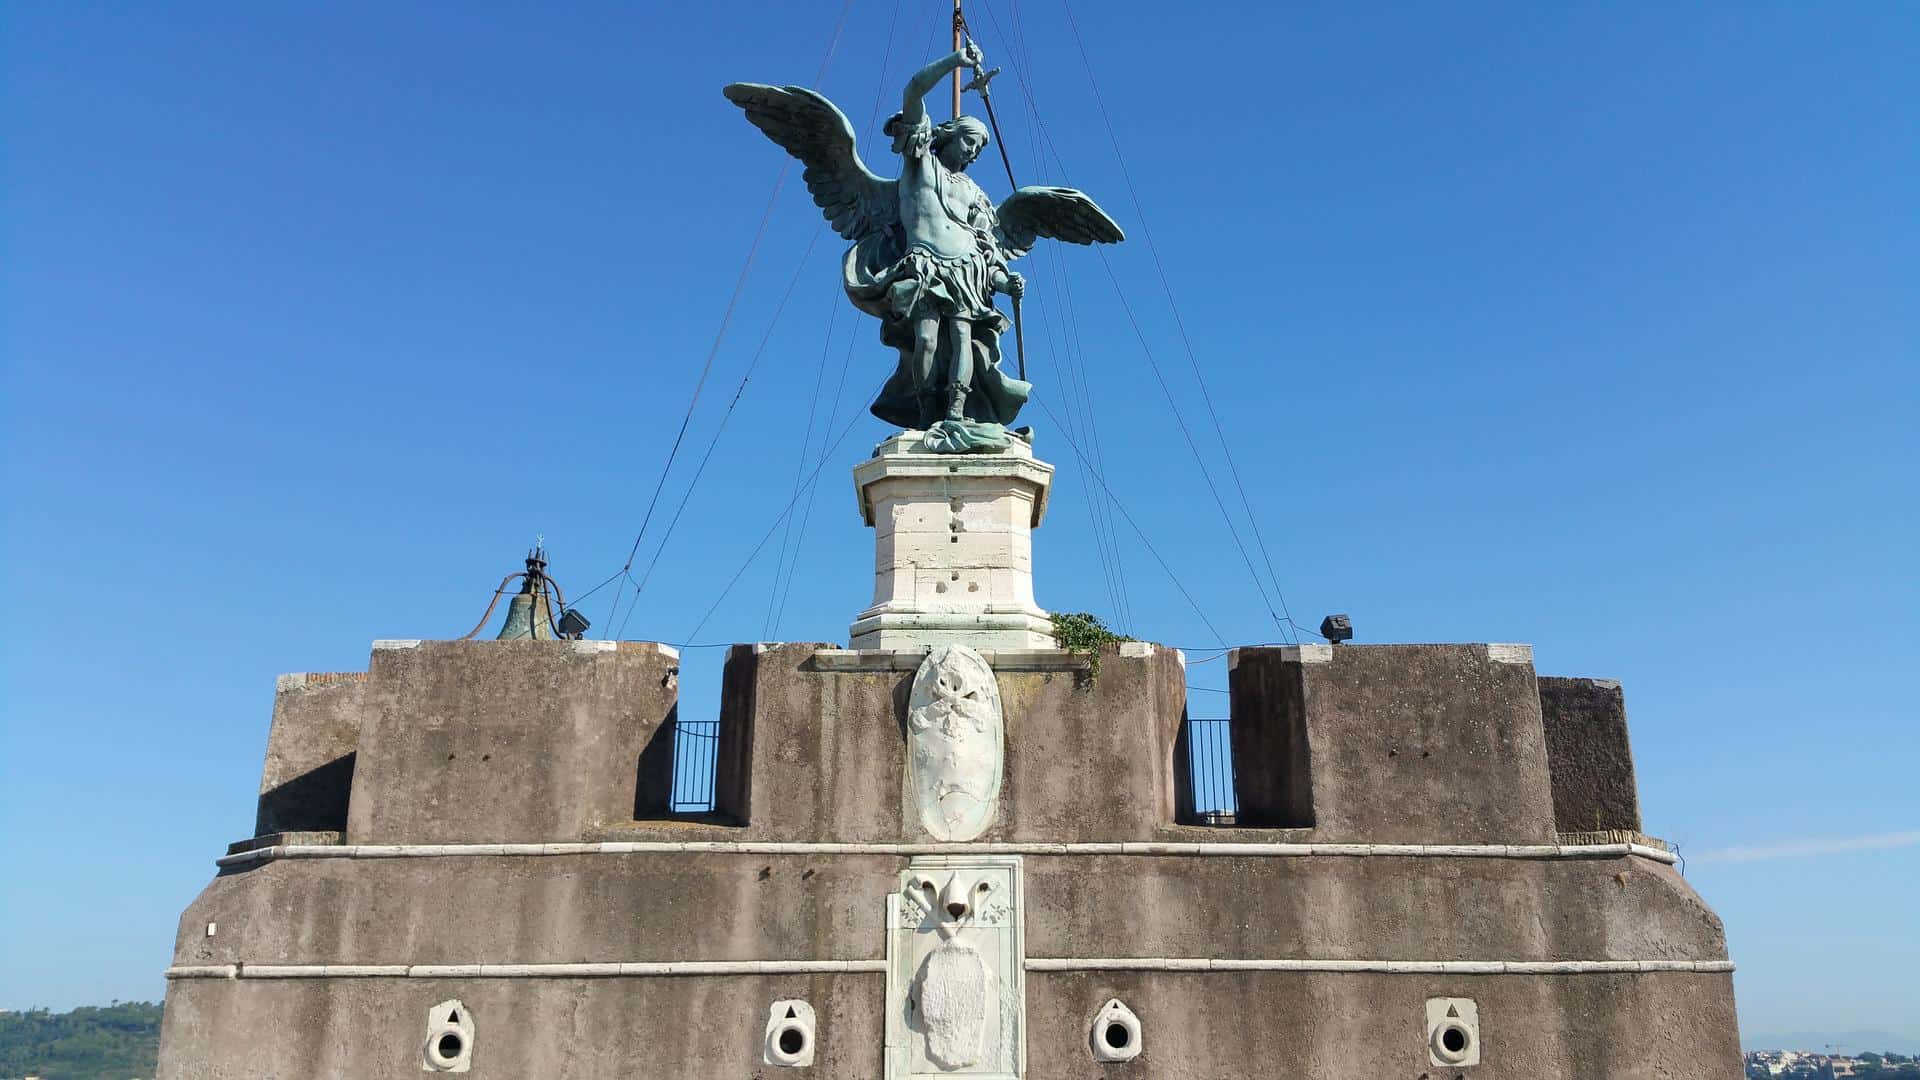 Statue on the Angel Terrace of Castel Sant’Angelo